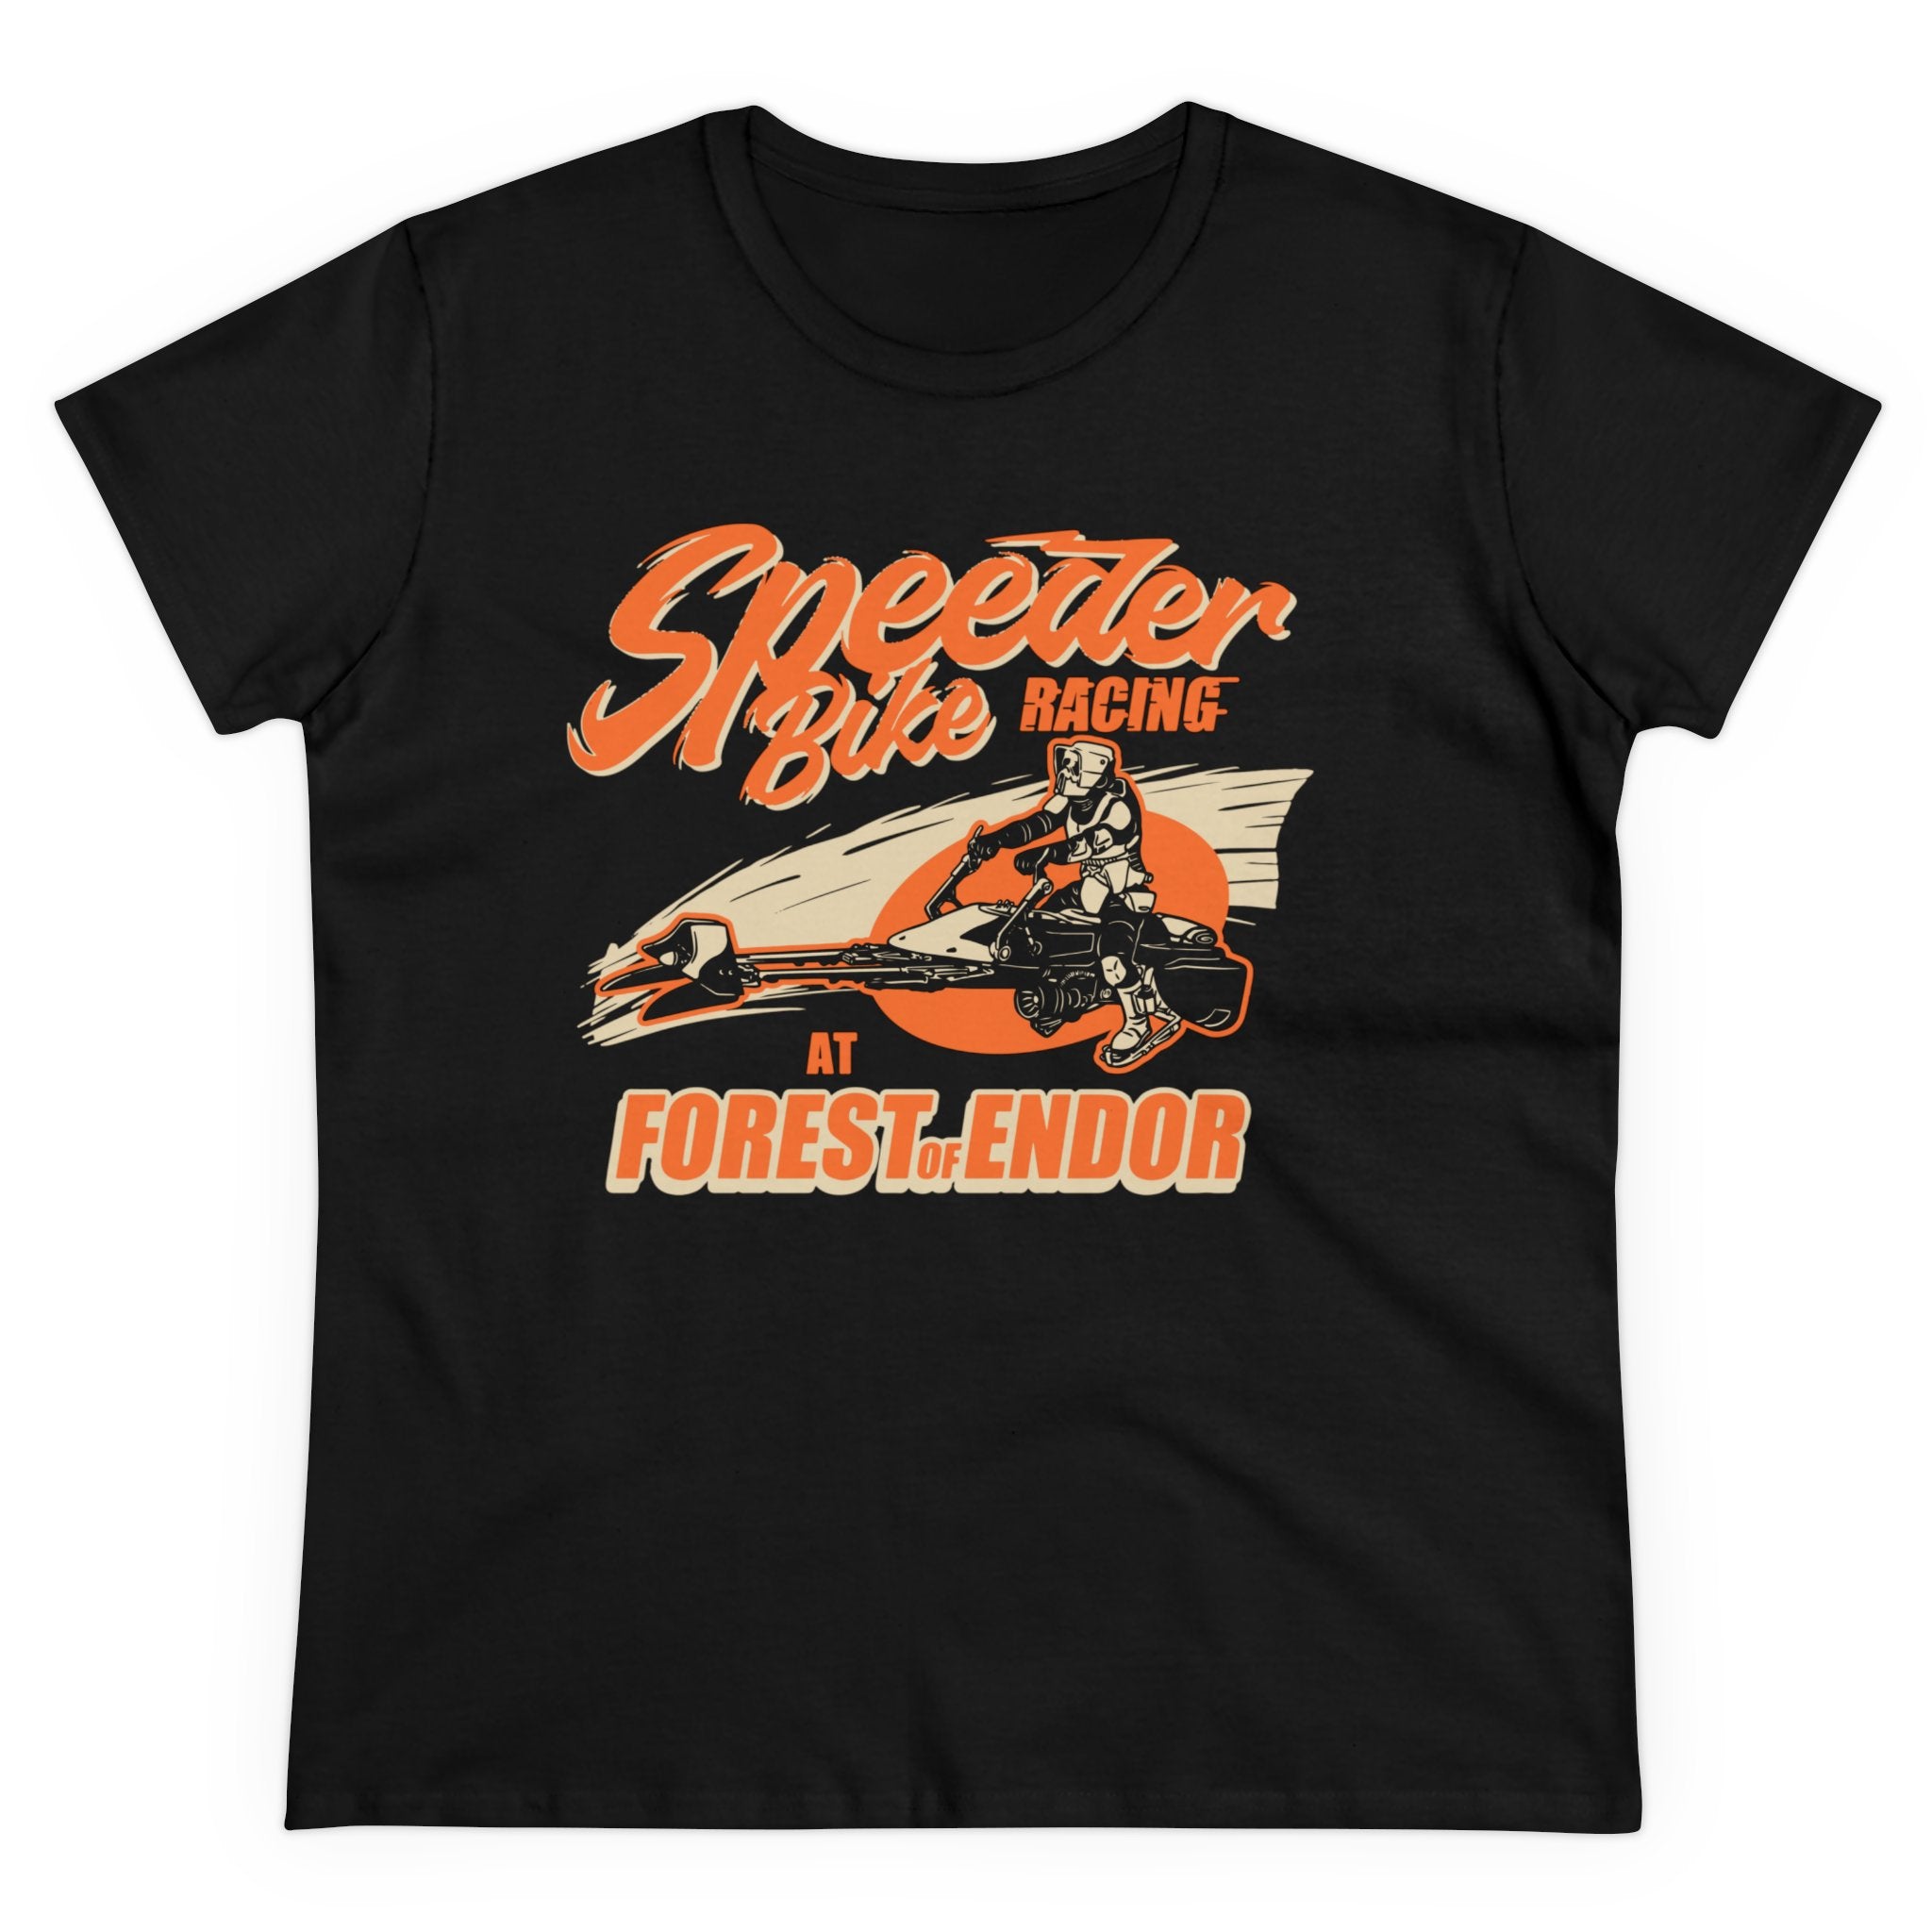 Speeder Bike Racing - Women's Tee in black, featuring a design with a speeder bike rider and the text "Speeder Bike Racing at Forest of Endor" in orange and beige colors, crafted from pre-shrunk cotton for lasting comfort.